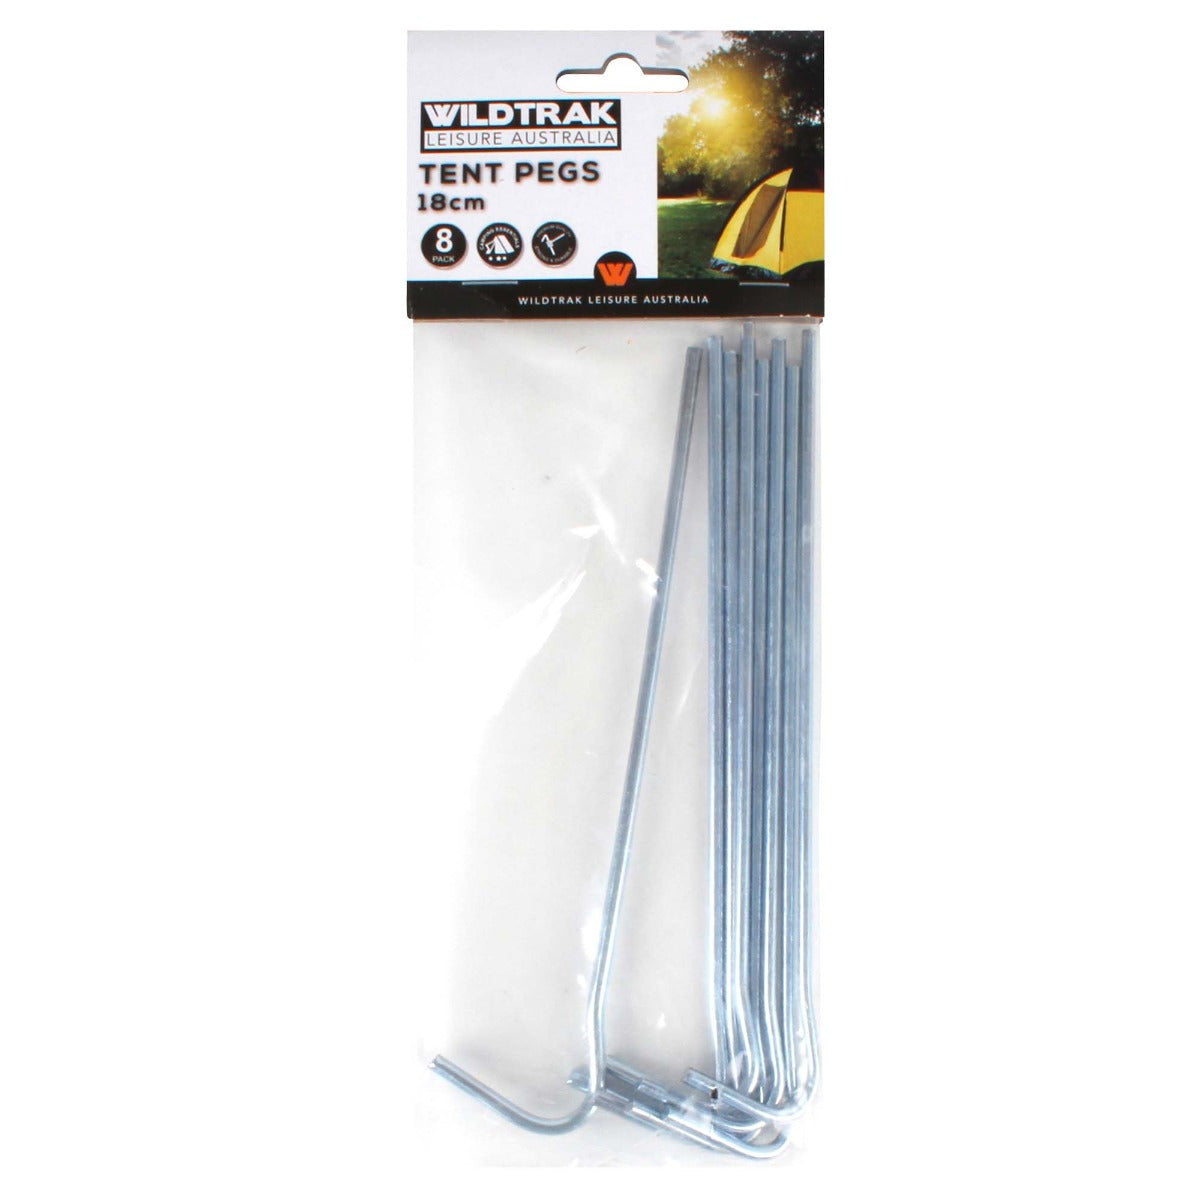 8 PACK 18CM TENT PEGS